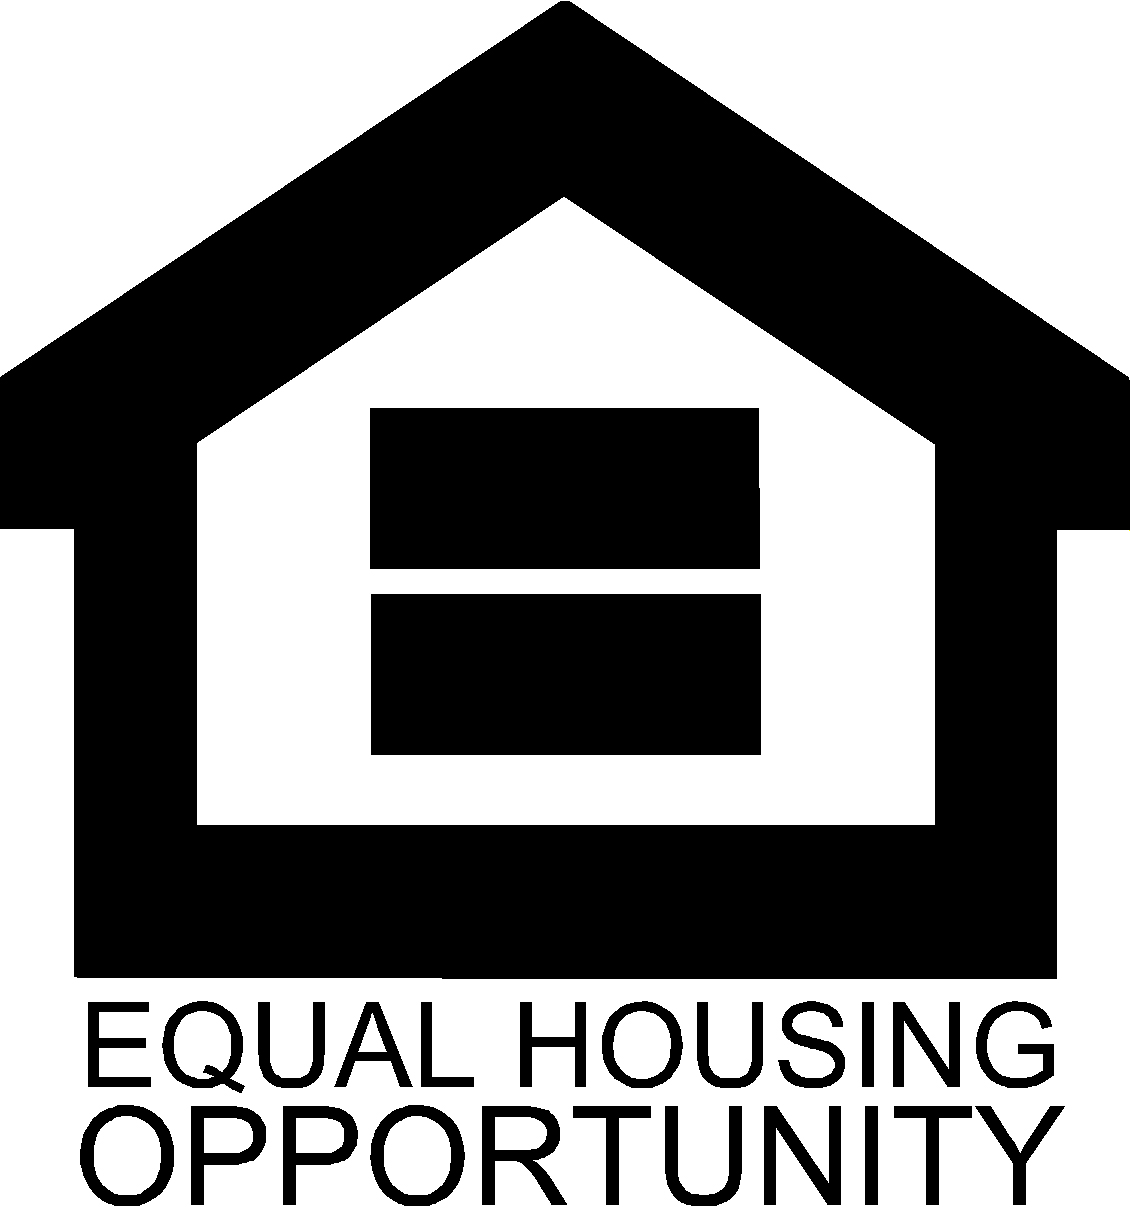 Habitat Wake is an equal opportunity lender